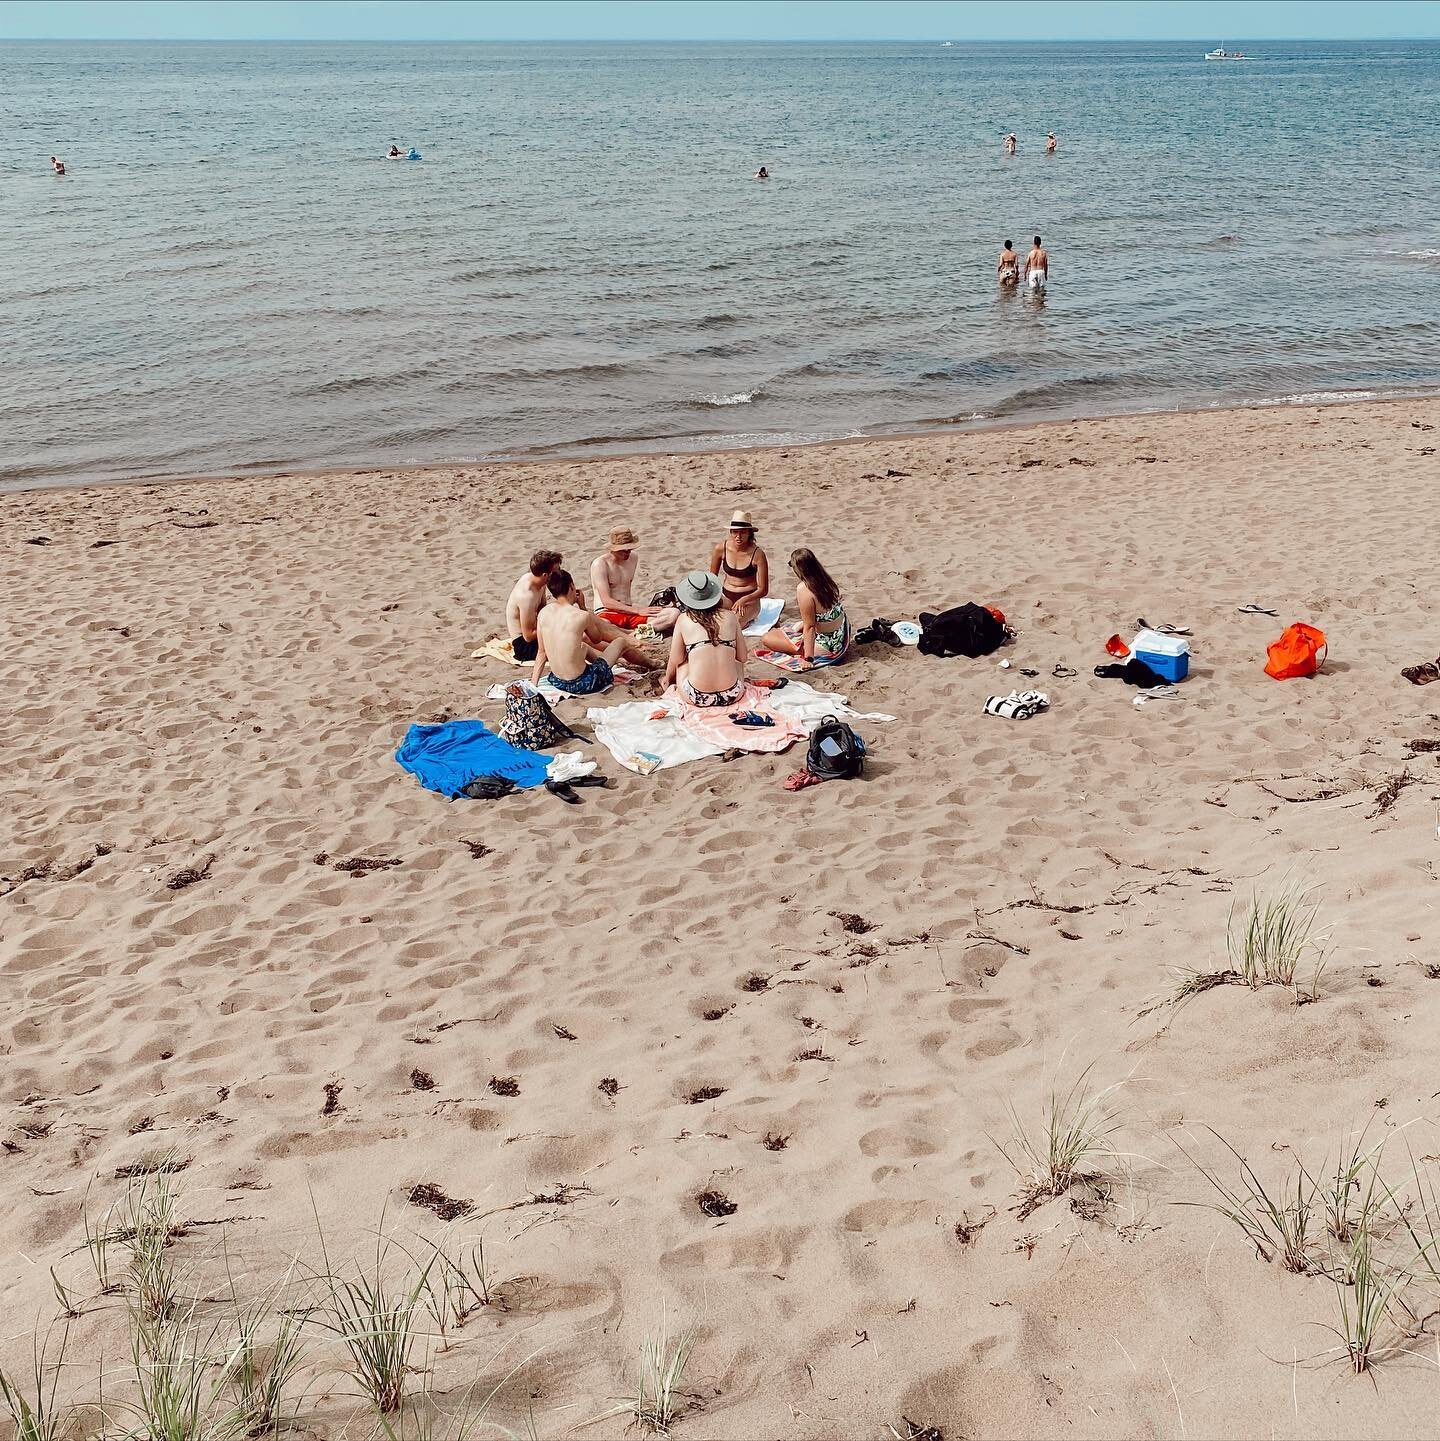 Summer weekends in New Brunswick mean enjoying the warm ocean waters of the Northumberland Strait and cribbage on the beach.. #thegoodlife 
⠀⠀⠀⠀⠀⠀⠀⠀⠀
A short 15-minute drive from the farm for us to enjoy all summer.